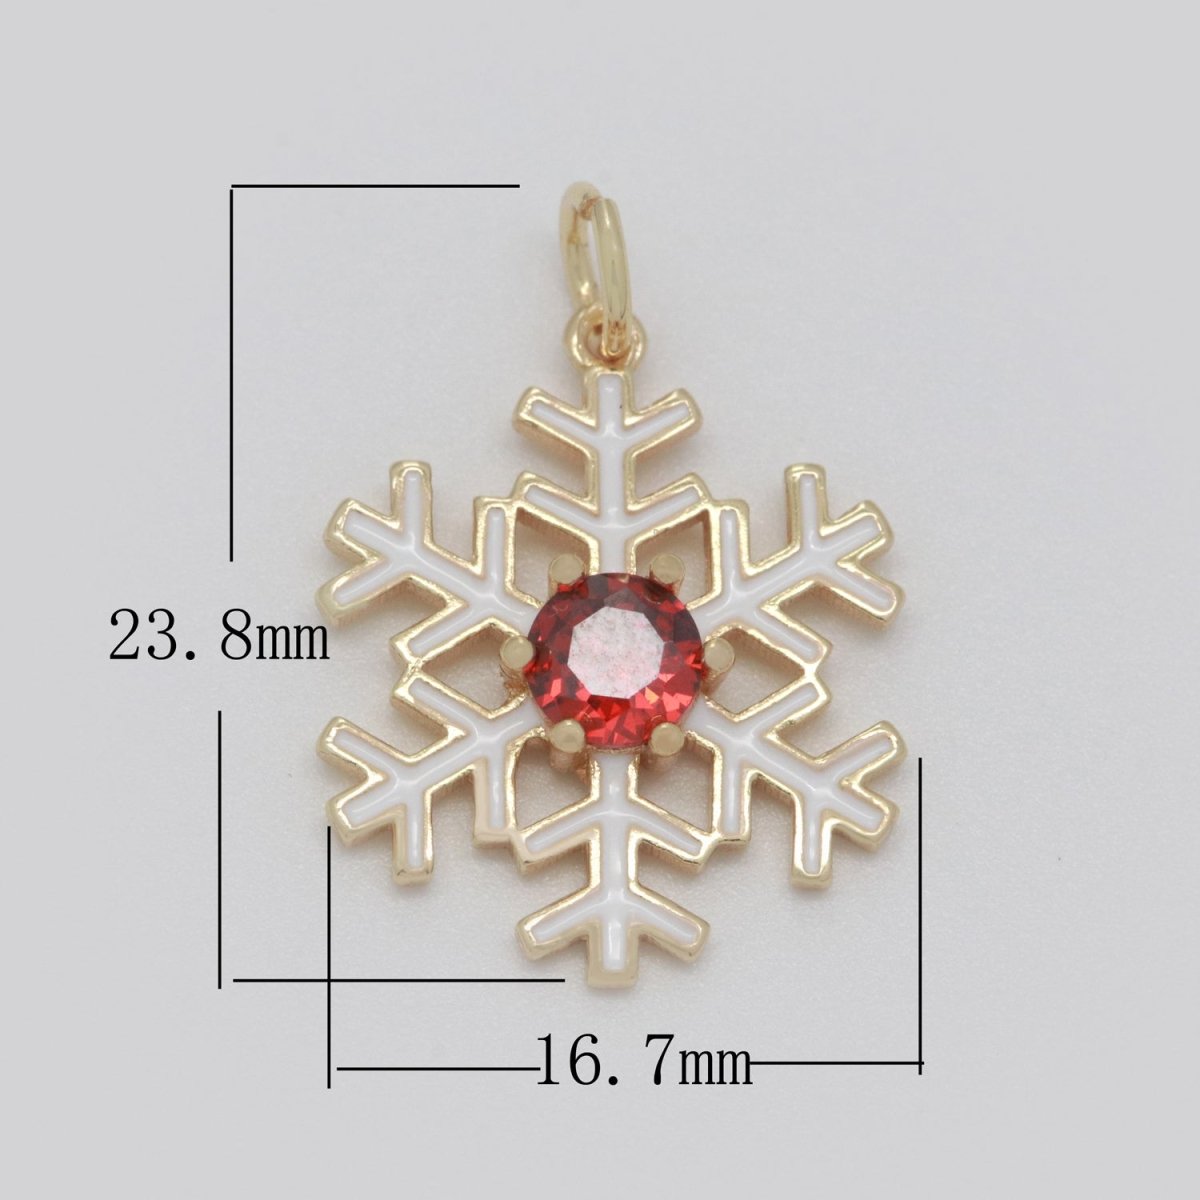 14k Gold Filled 24x16.5mm Wholesale Gold Snowflake Pendant with Red Cubic Zirconia Stone Pendant for Necklace Bracelet Earring Making M-719 - DLUXCA